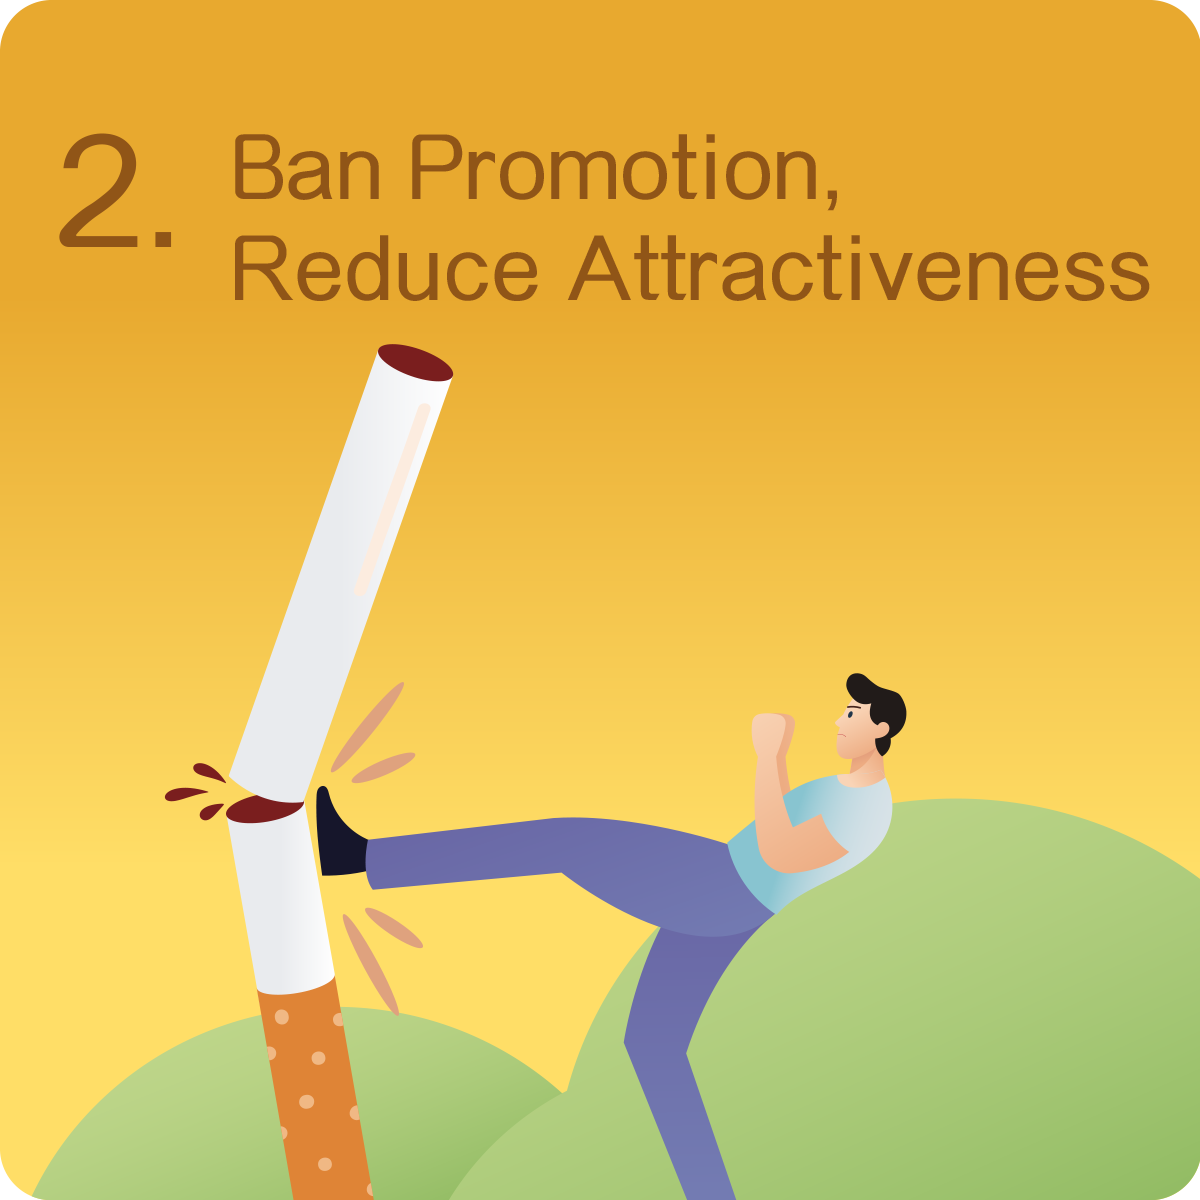 Ban Promotion, Reduce Attractiveness